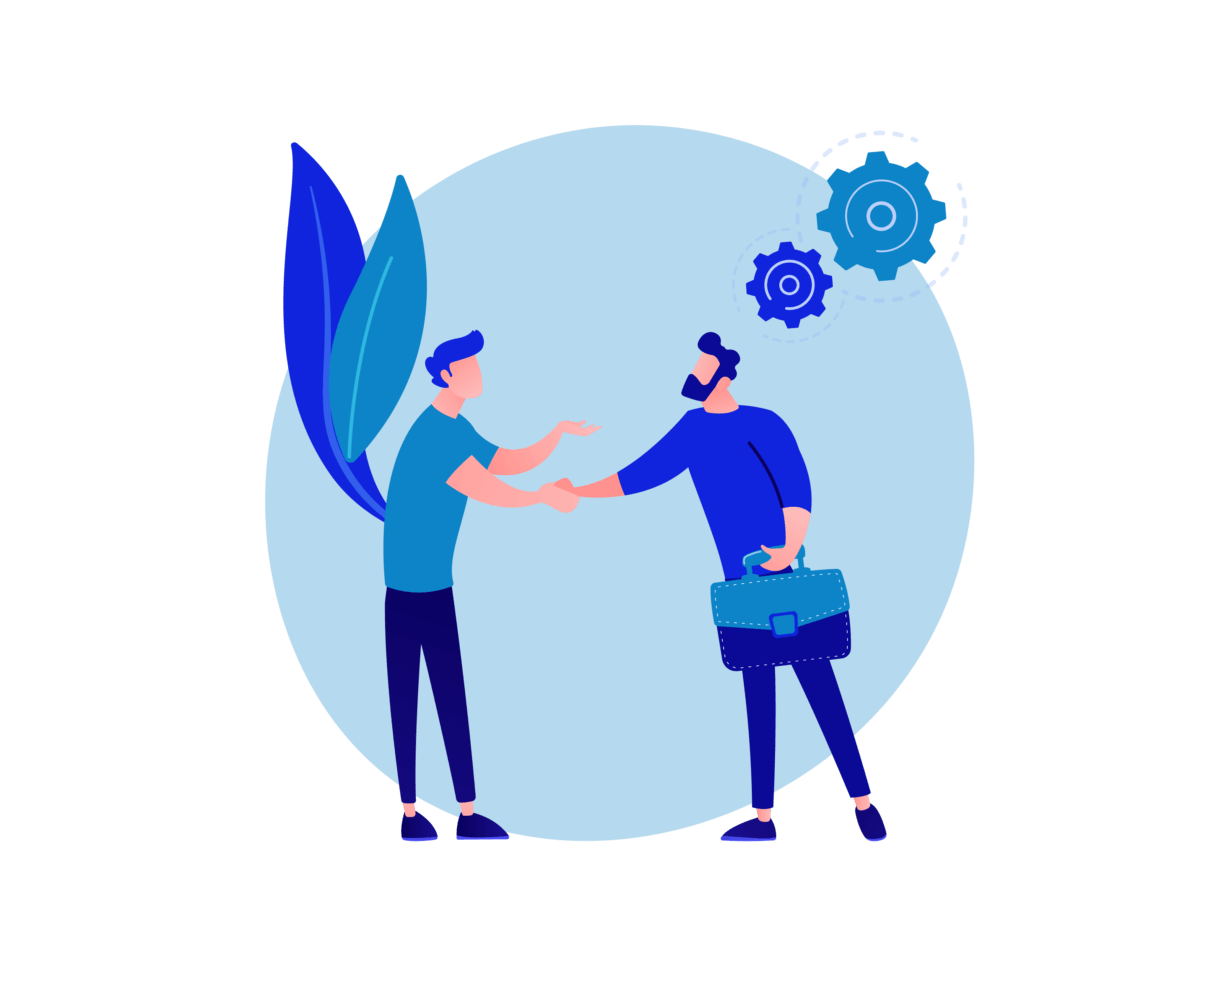 Illustration of two people shaking hands. in blue.